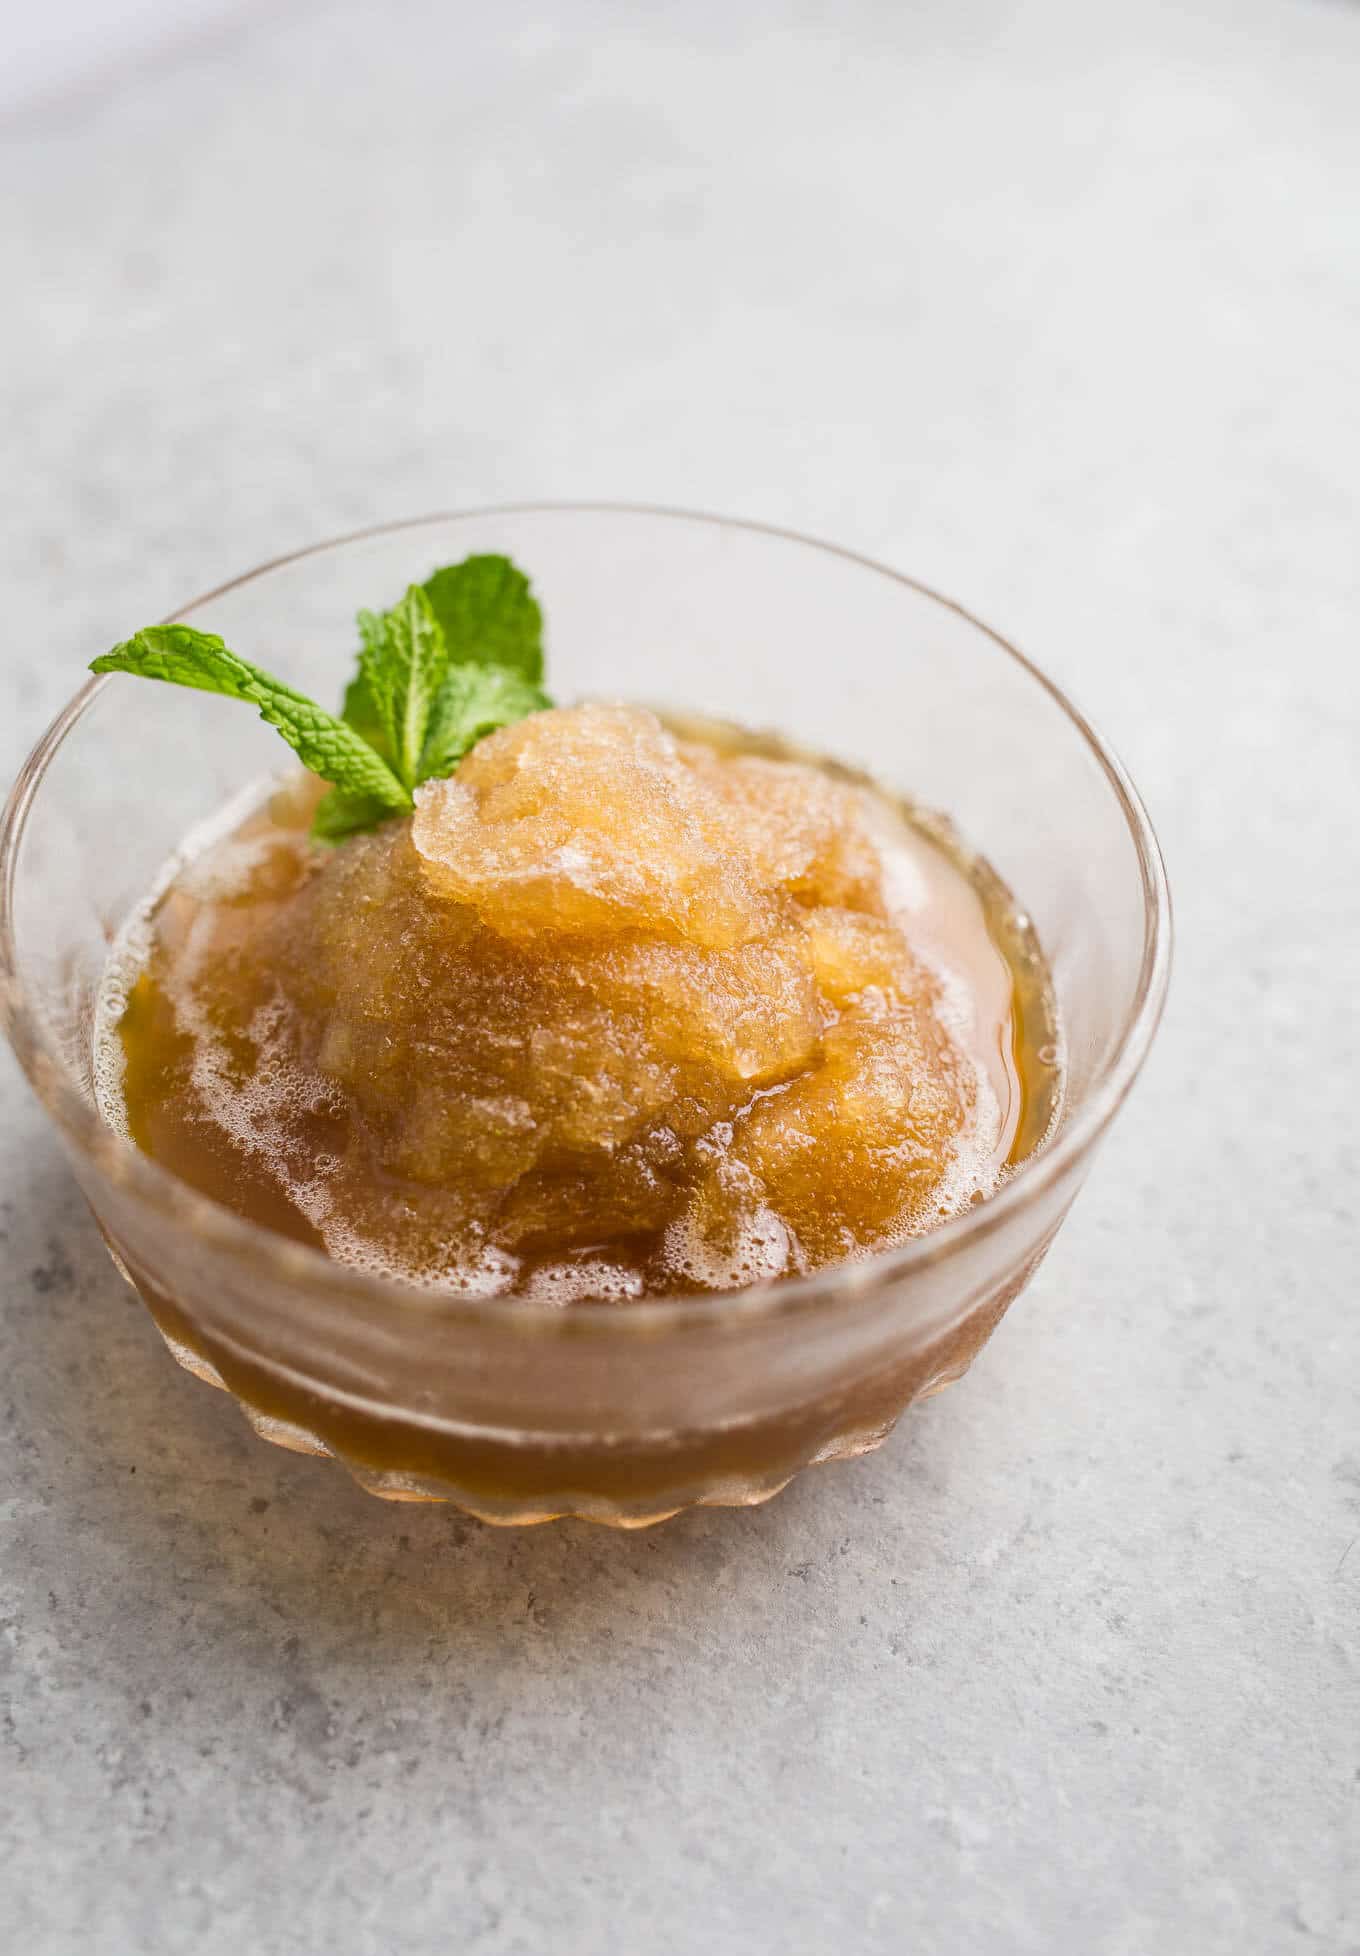 Mint Julep Granitas are made with a honey and mint infused simple syrup, bourbon, and are frozen until icy, flaked with a fork and frozen again. Served in a cup and garnished with mint.